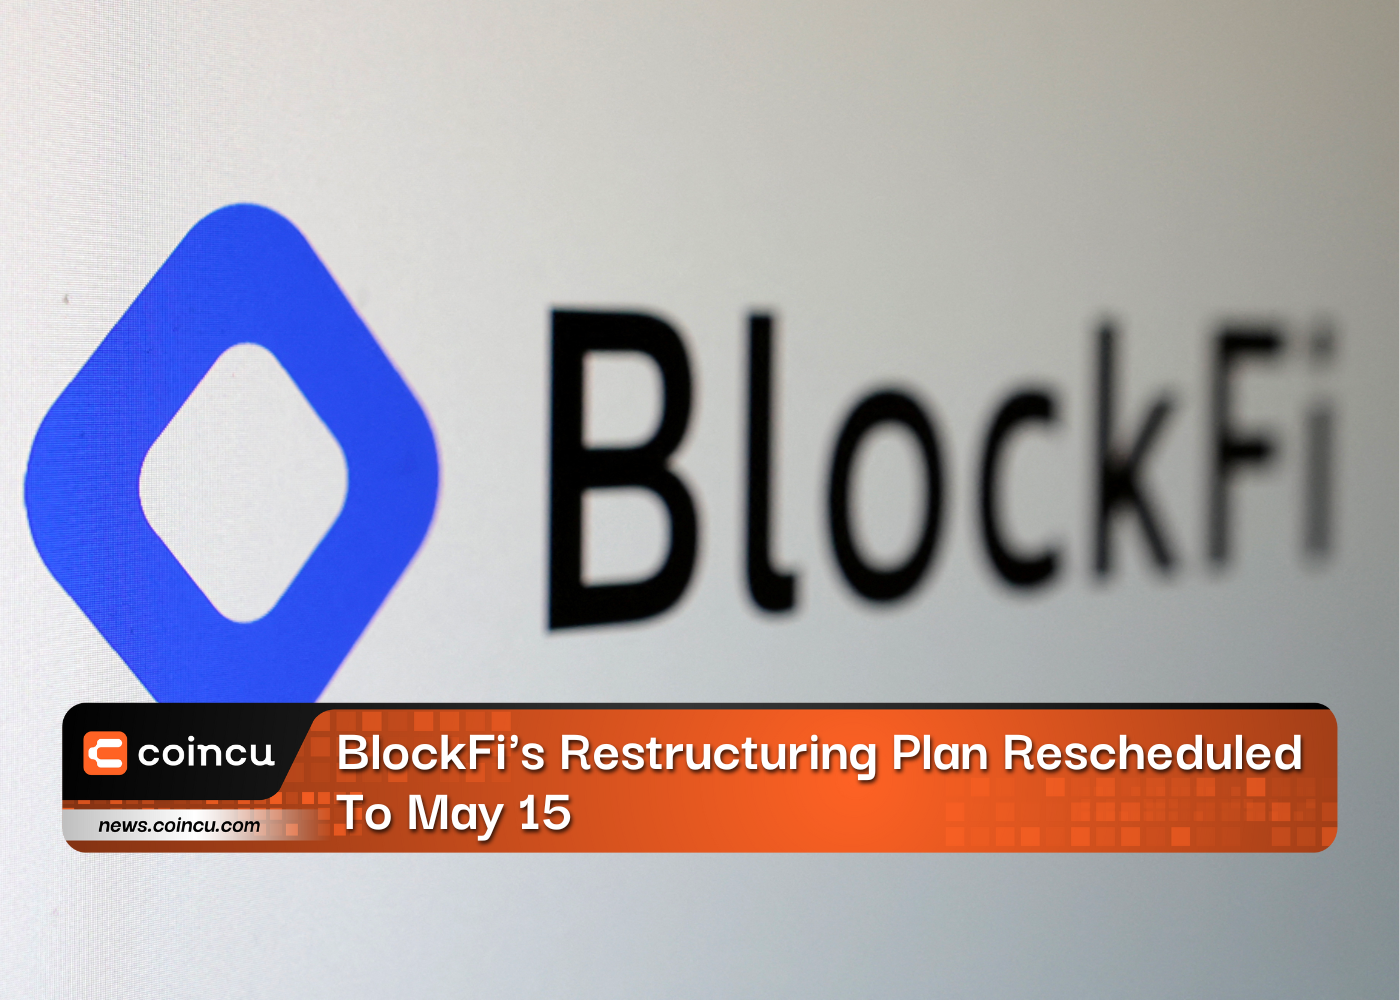 BlockFi's Restructuring Plan Rescheduled To May 15